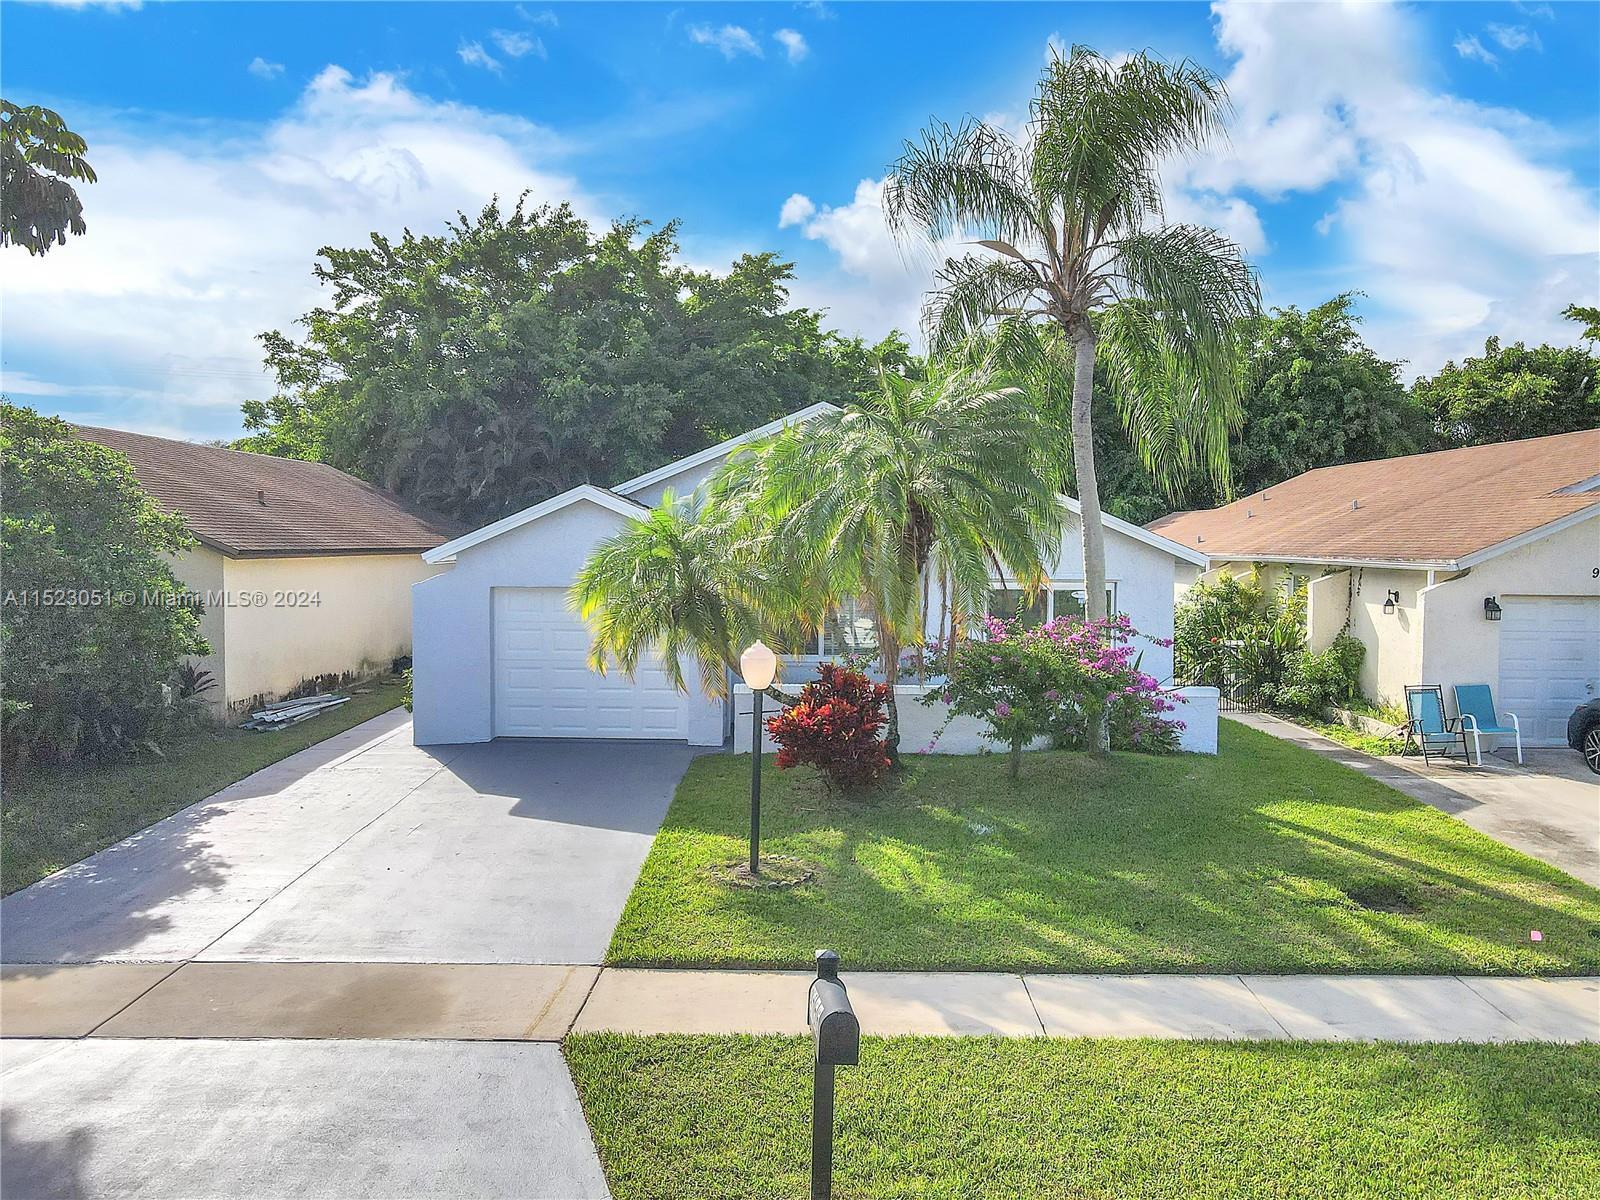 Elegant and spacious home in the exclusive community of Pine Springs in quiet West Boca Raton. Come 